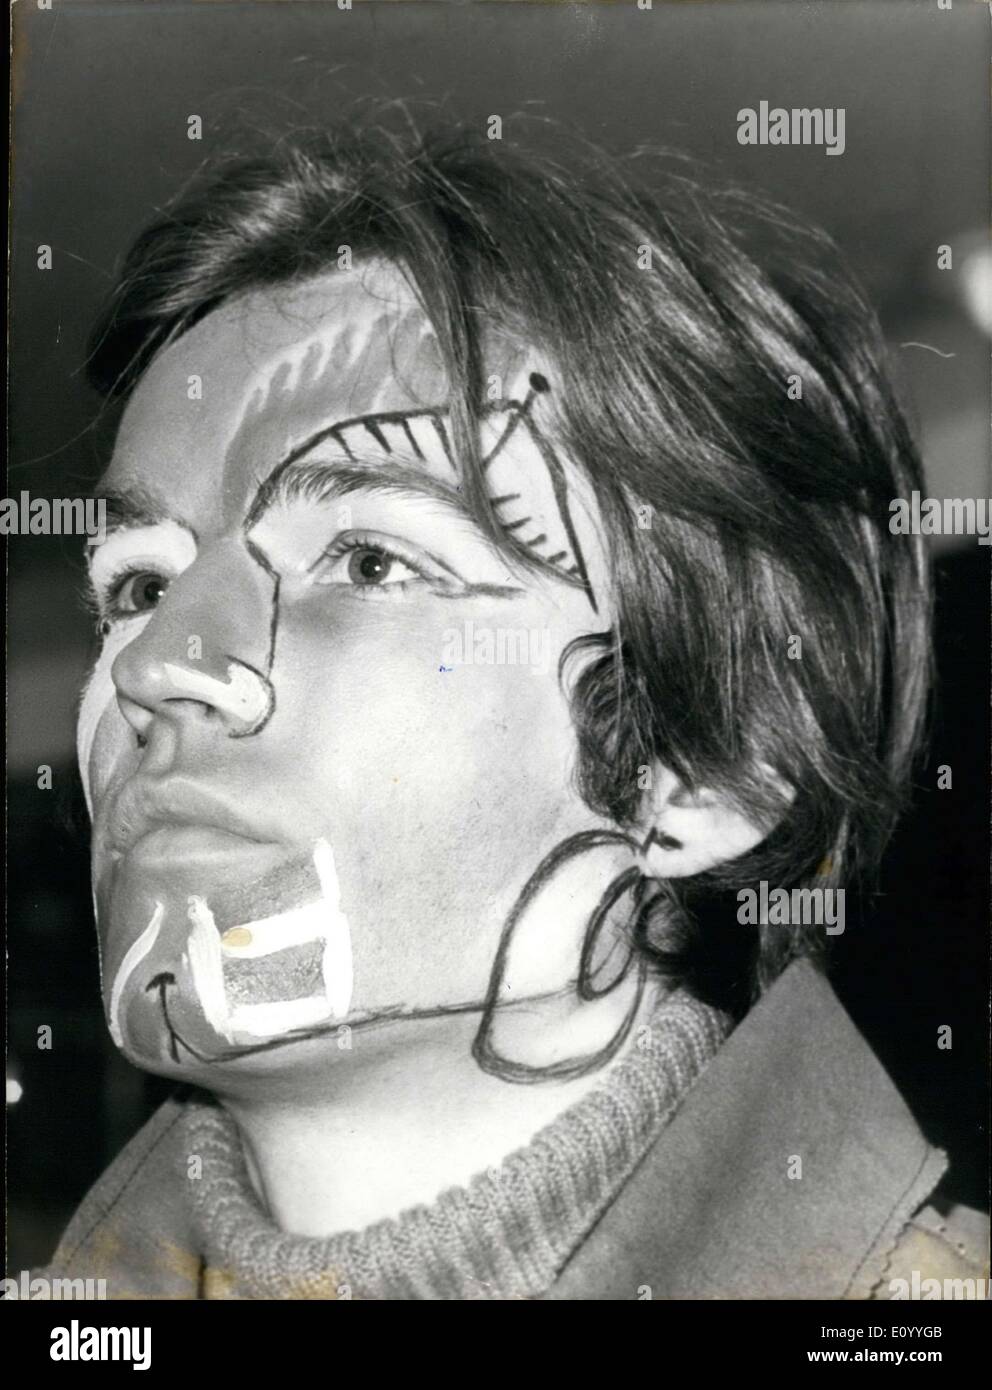 Nov. 13, 1971 - Vincent Roux is painting the faces of Paco Rabanne's clients and friends. Here is a picture of a young man with Stock Photo